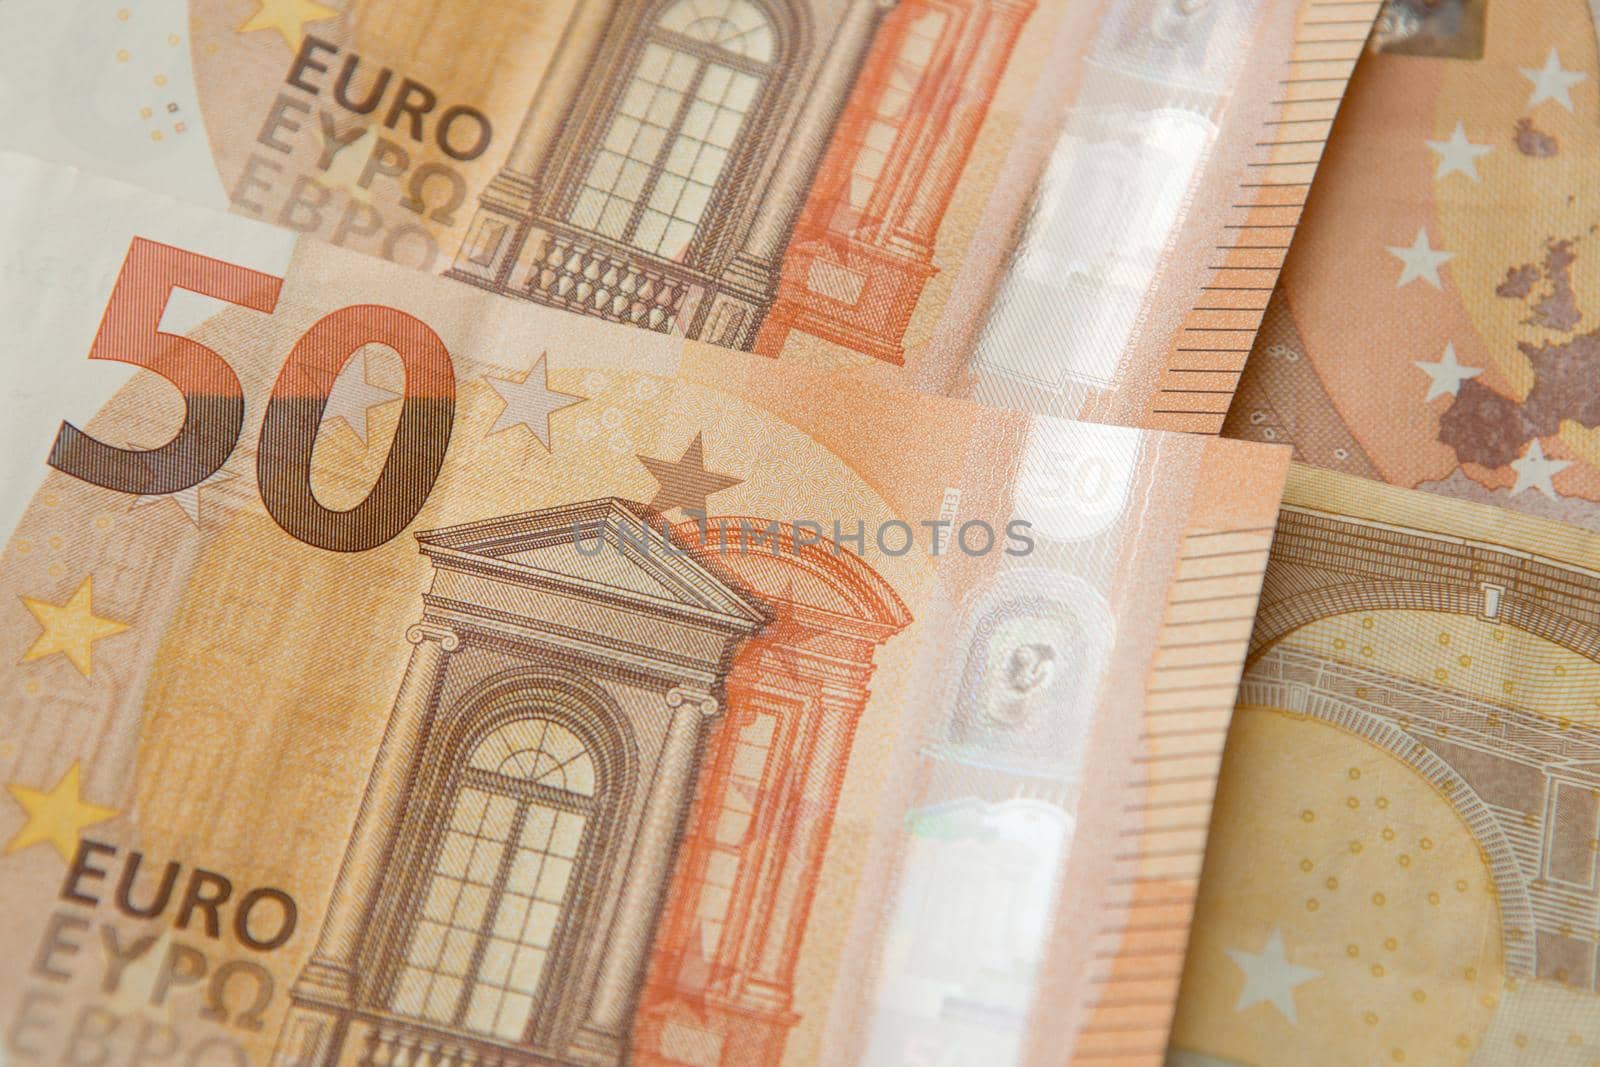 50 euro banknotes. European Union Currency banknotes. euro money by julija